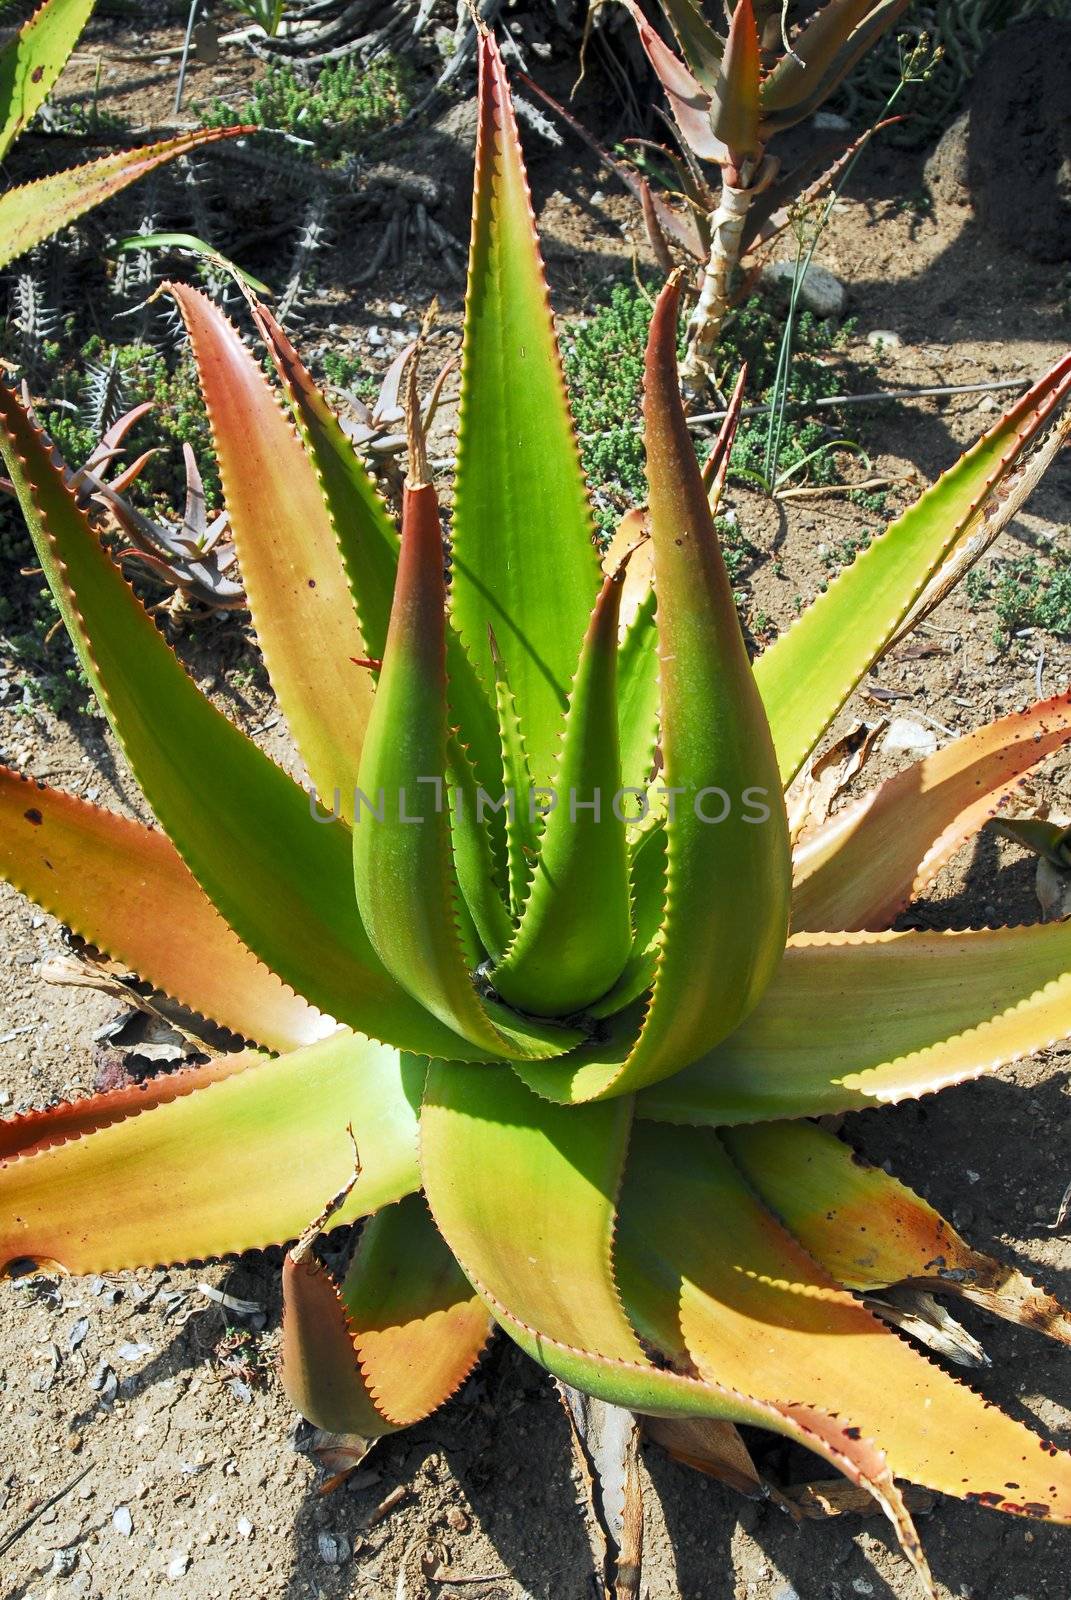 An isolated shot of a green aloe vera succulent plant